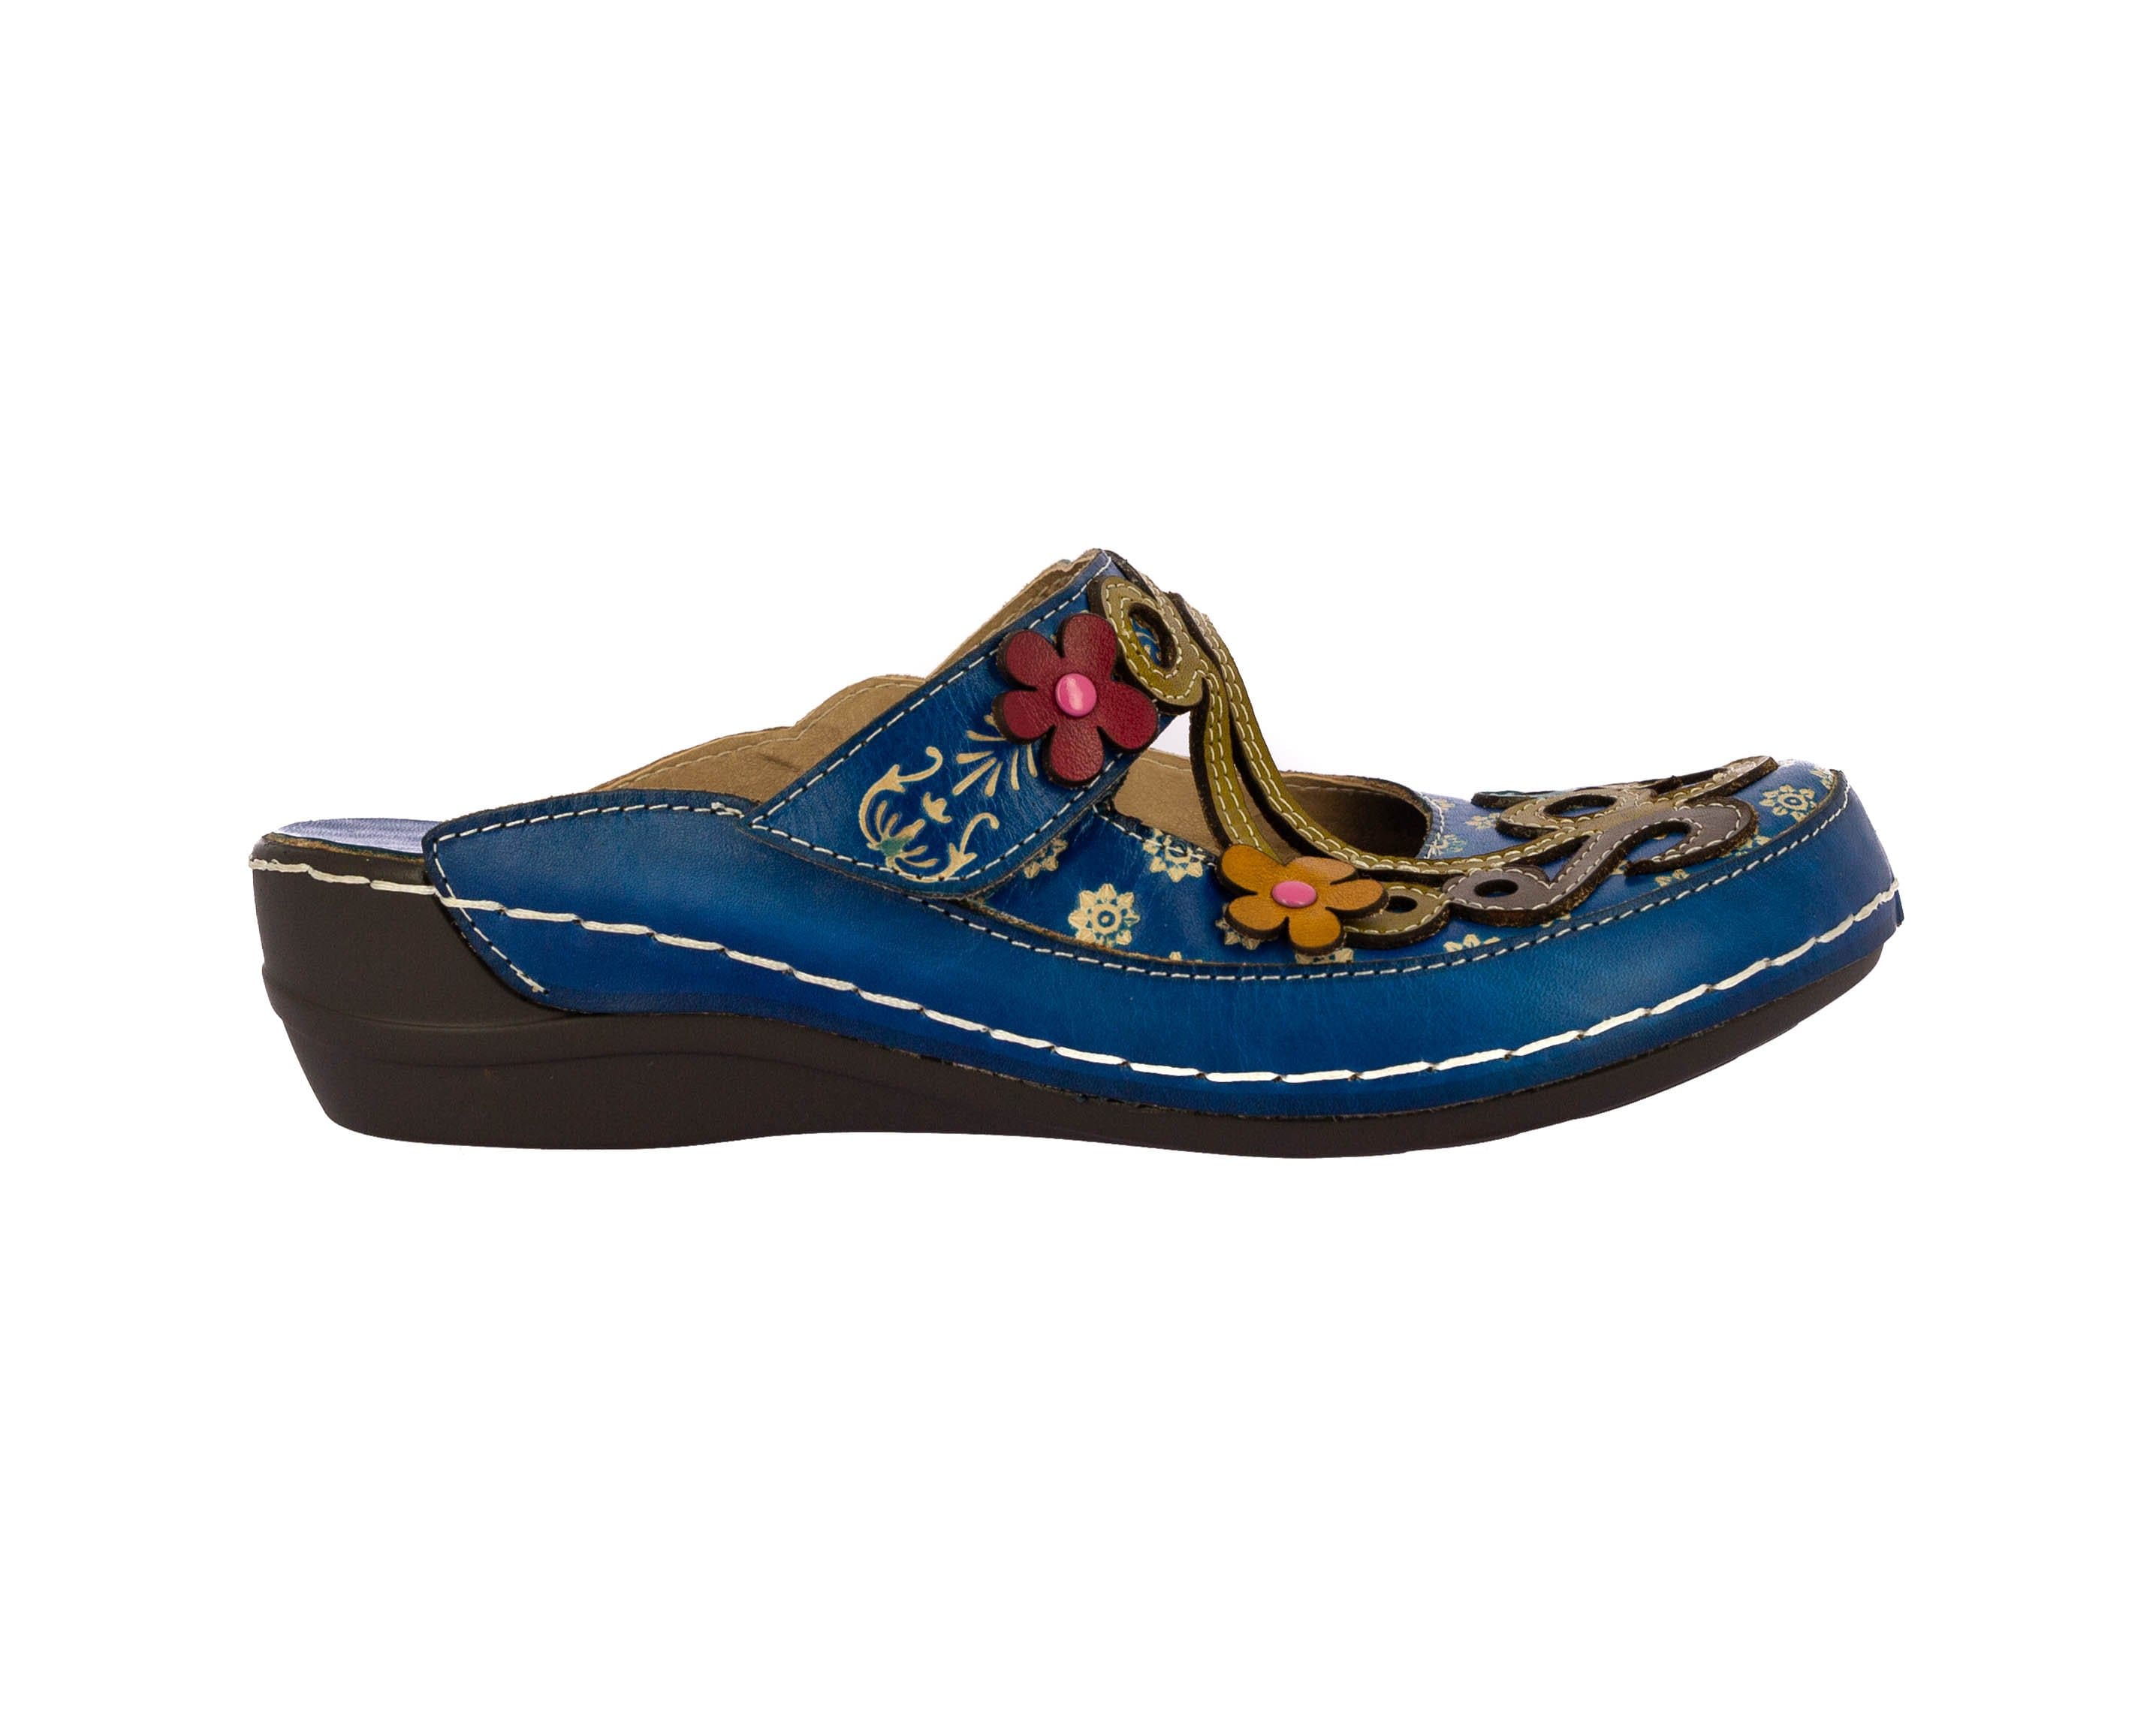 HECTO 08 - 35 / TURQUOISE sko - Mulle